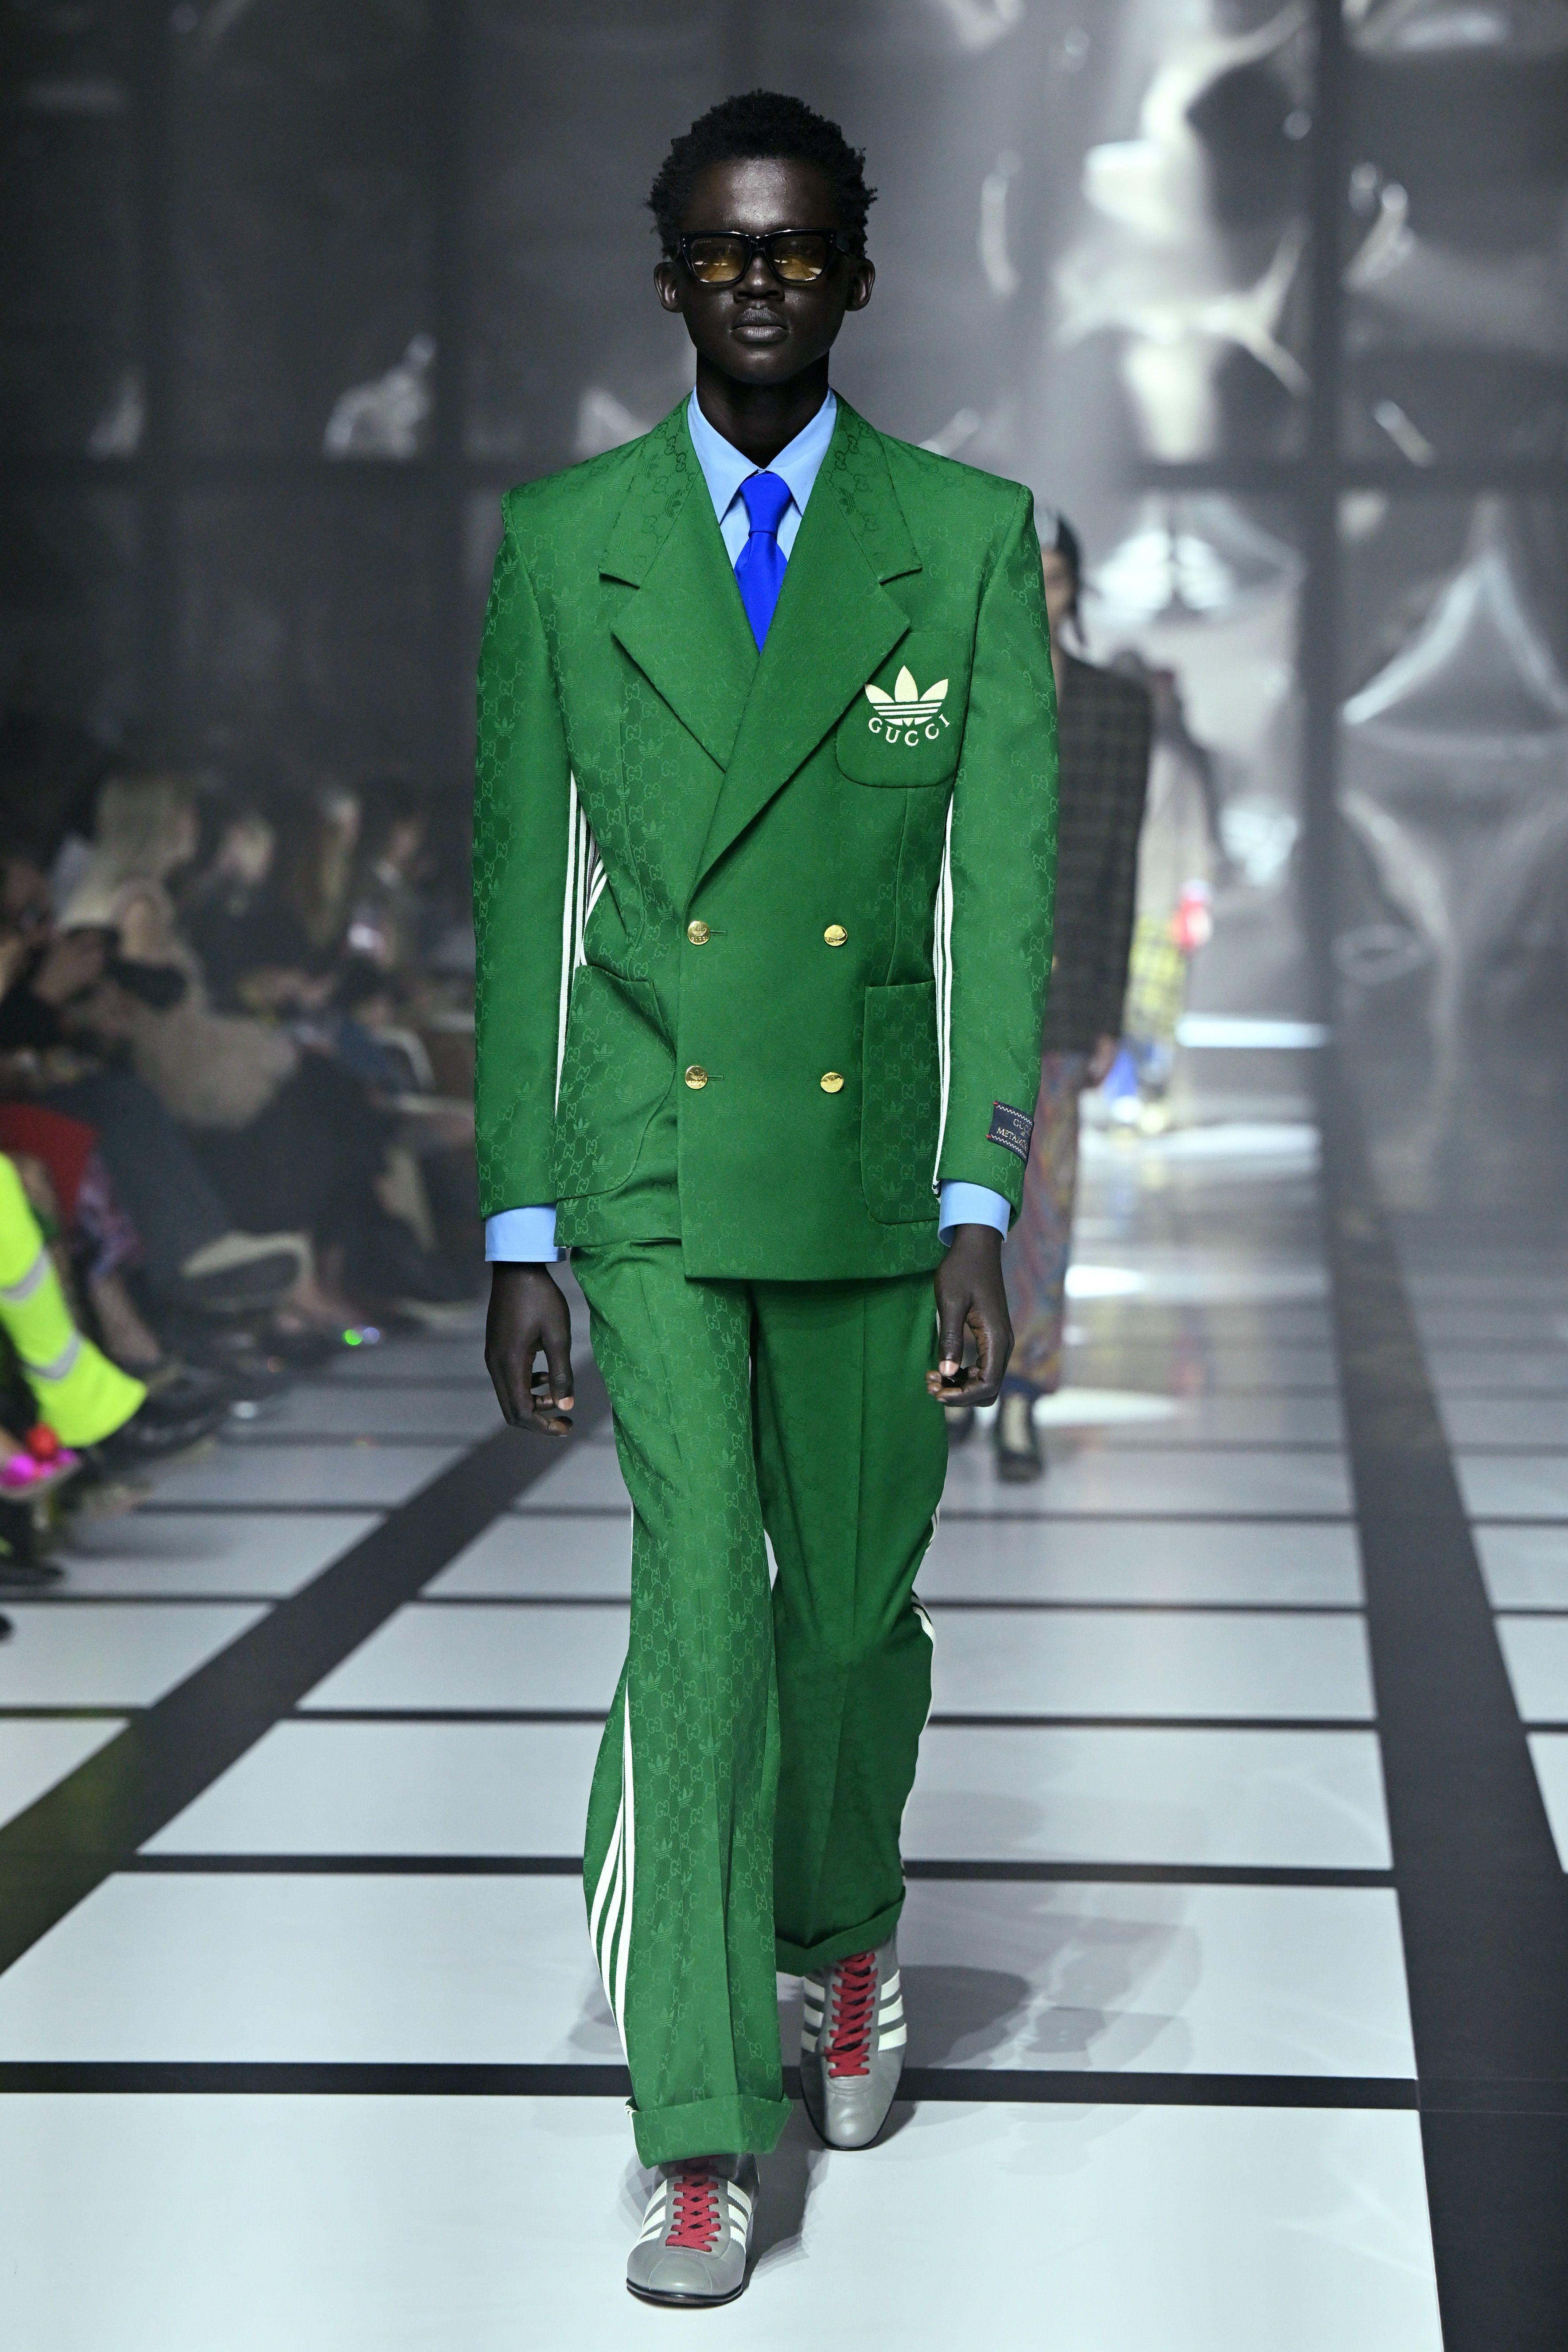 Gucci Suits | vlr.eng.br